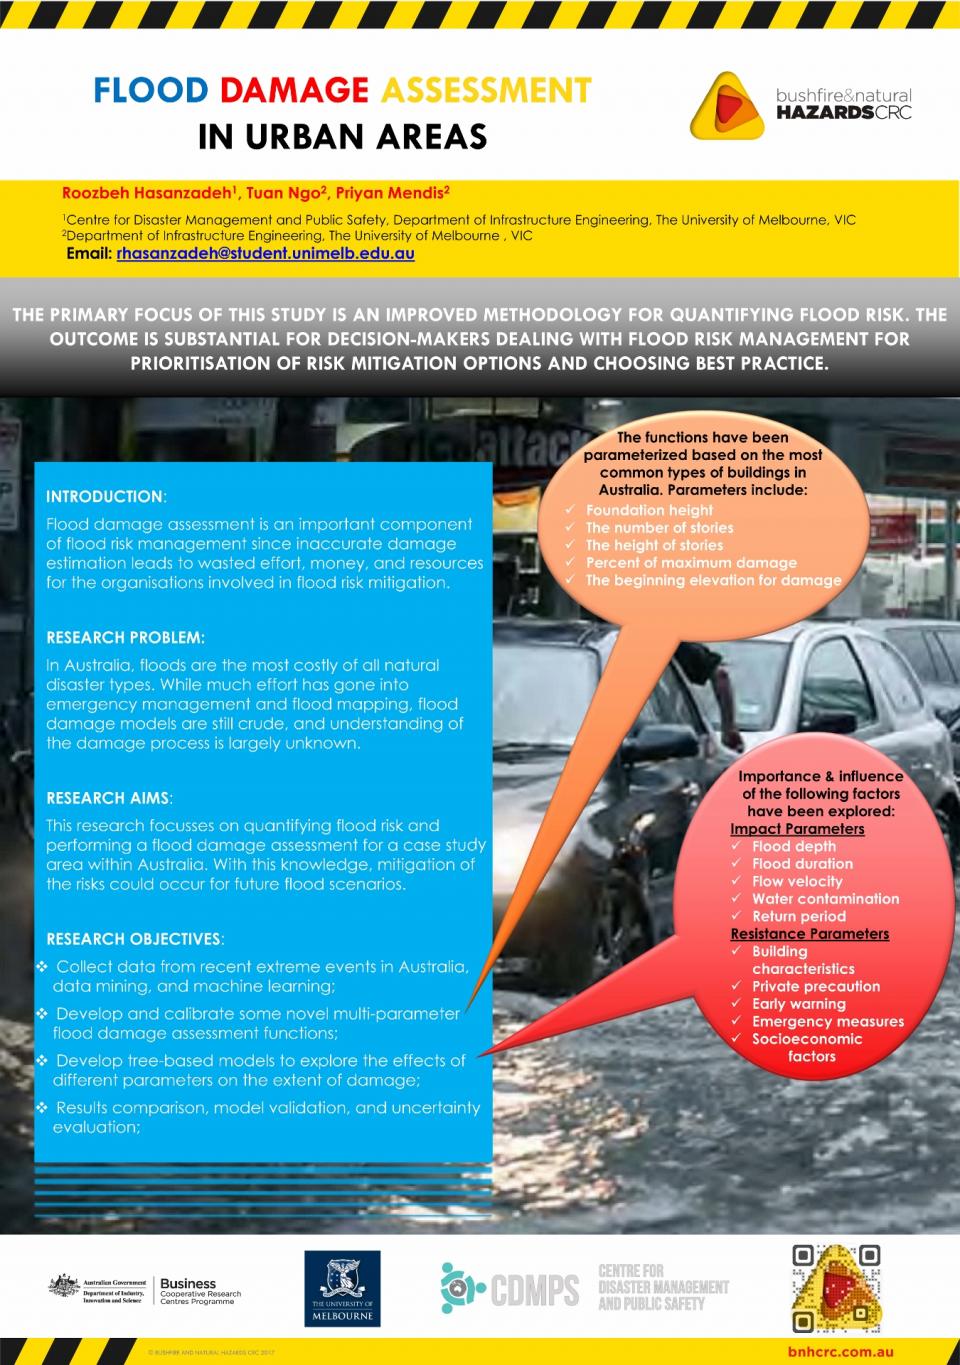 Flood damage assessment in urban areas